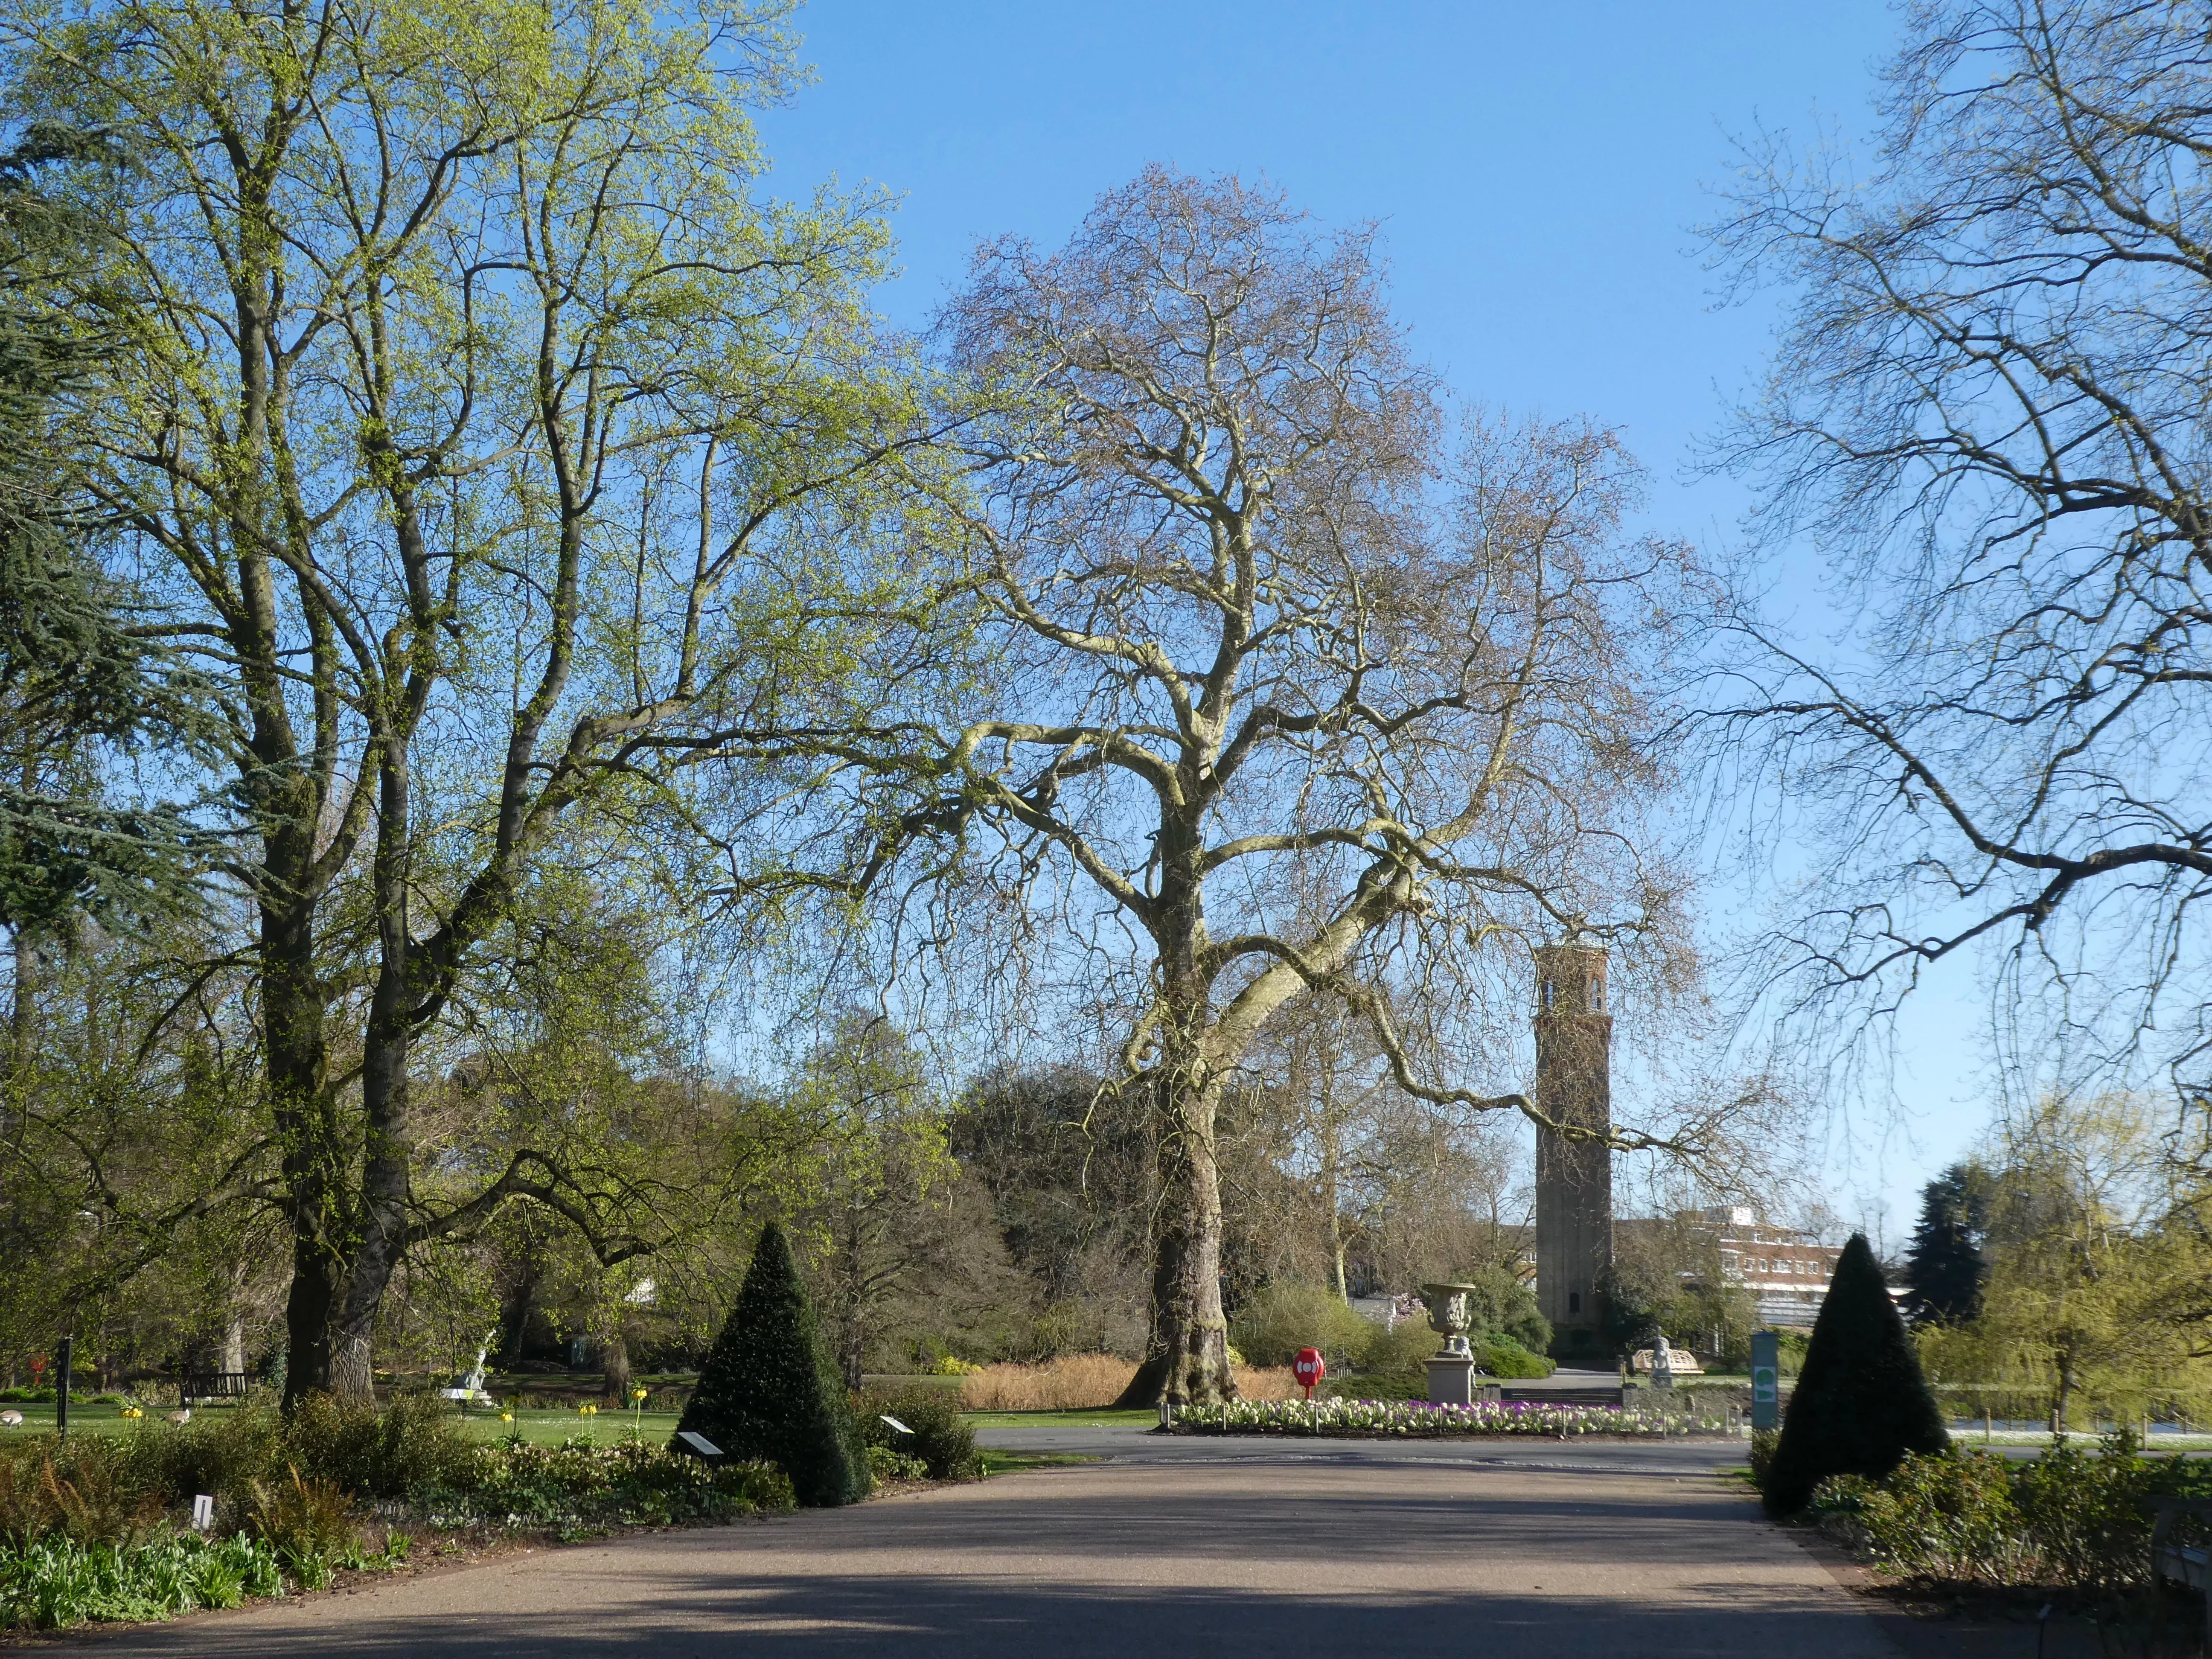 London Plane tree at the end of the Broad Walk at Kew Gardens